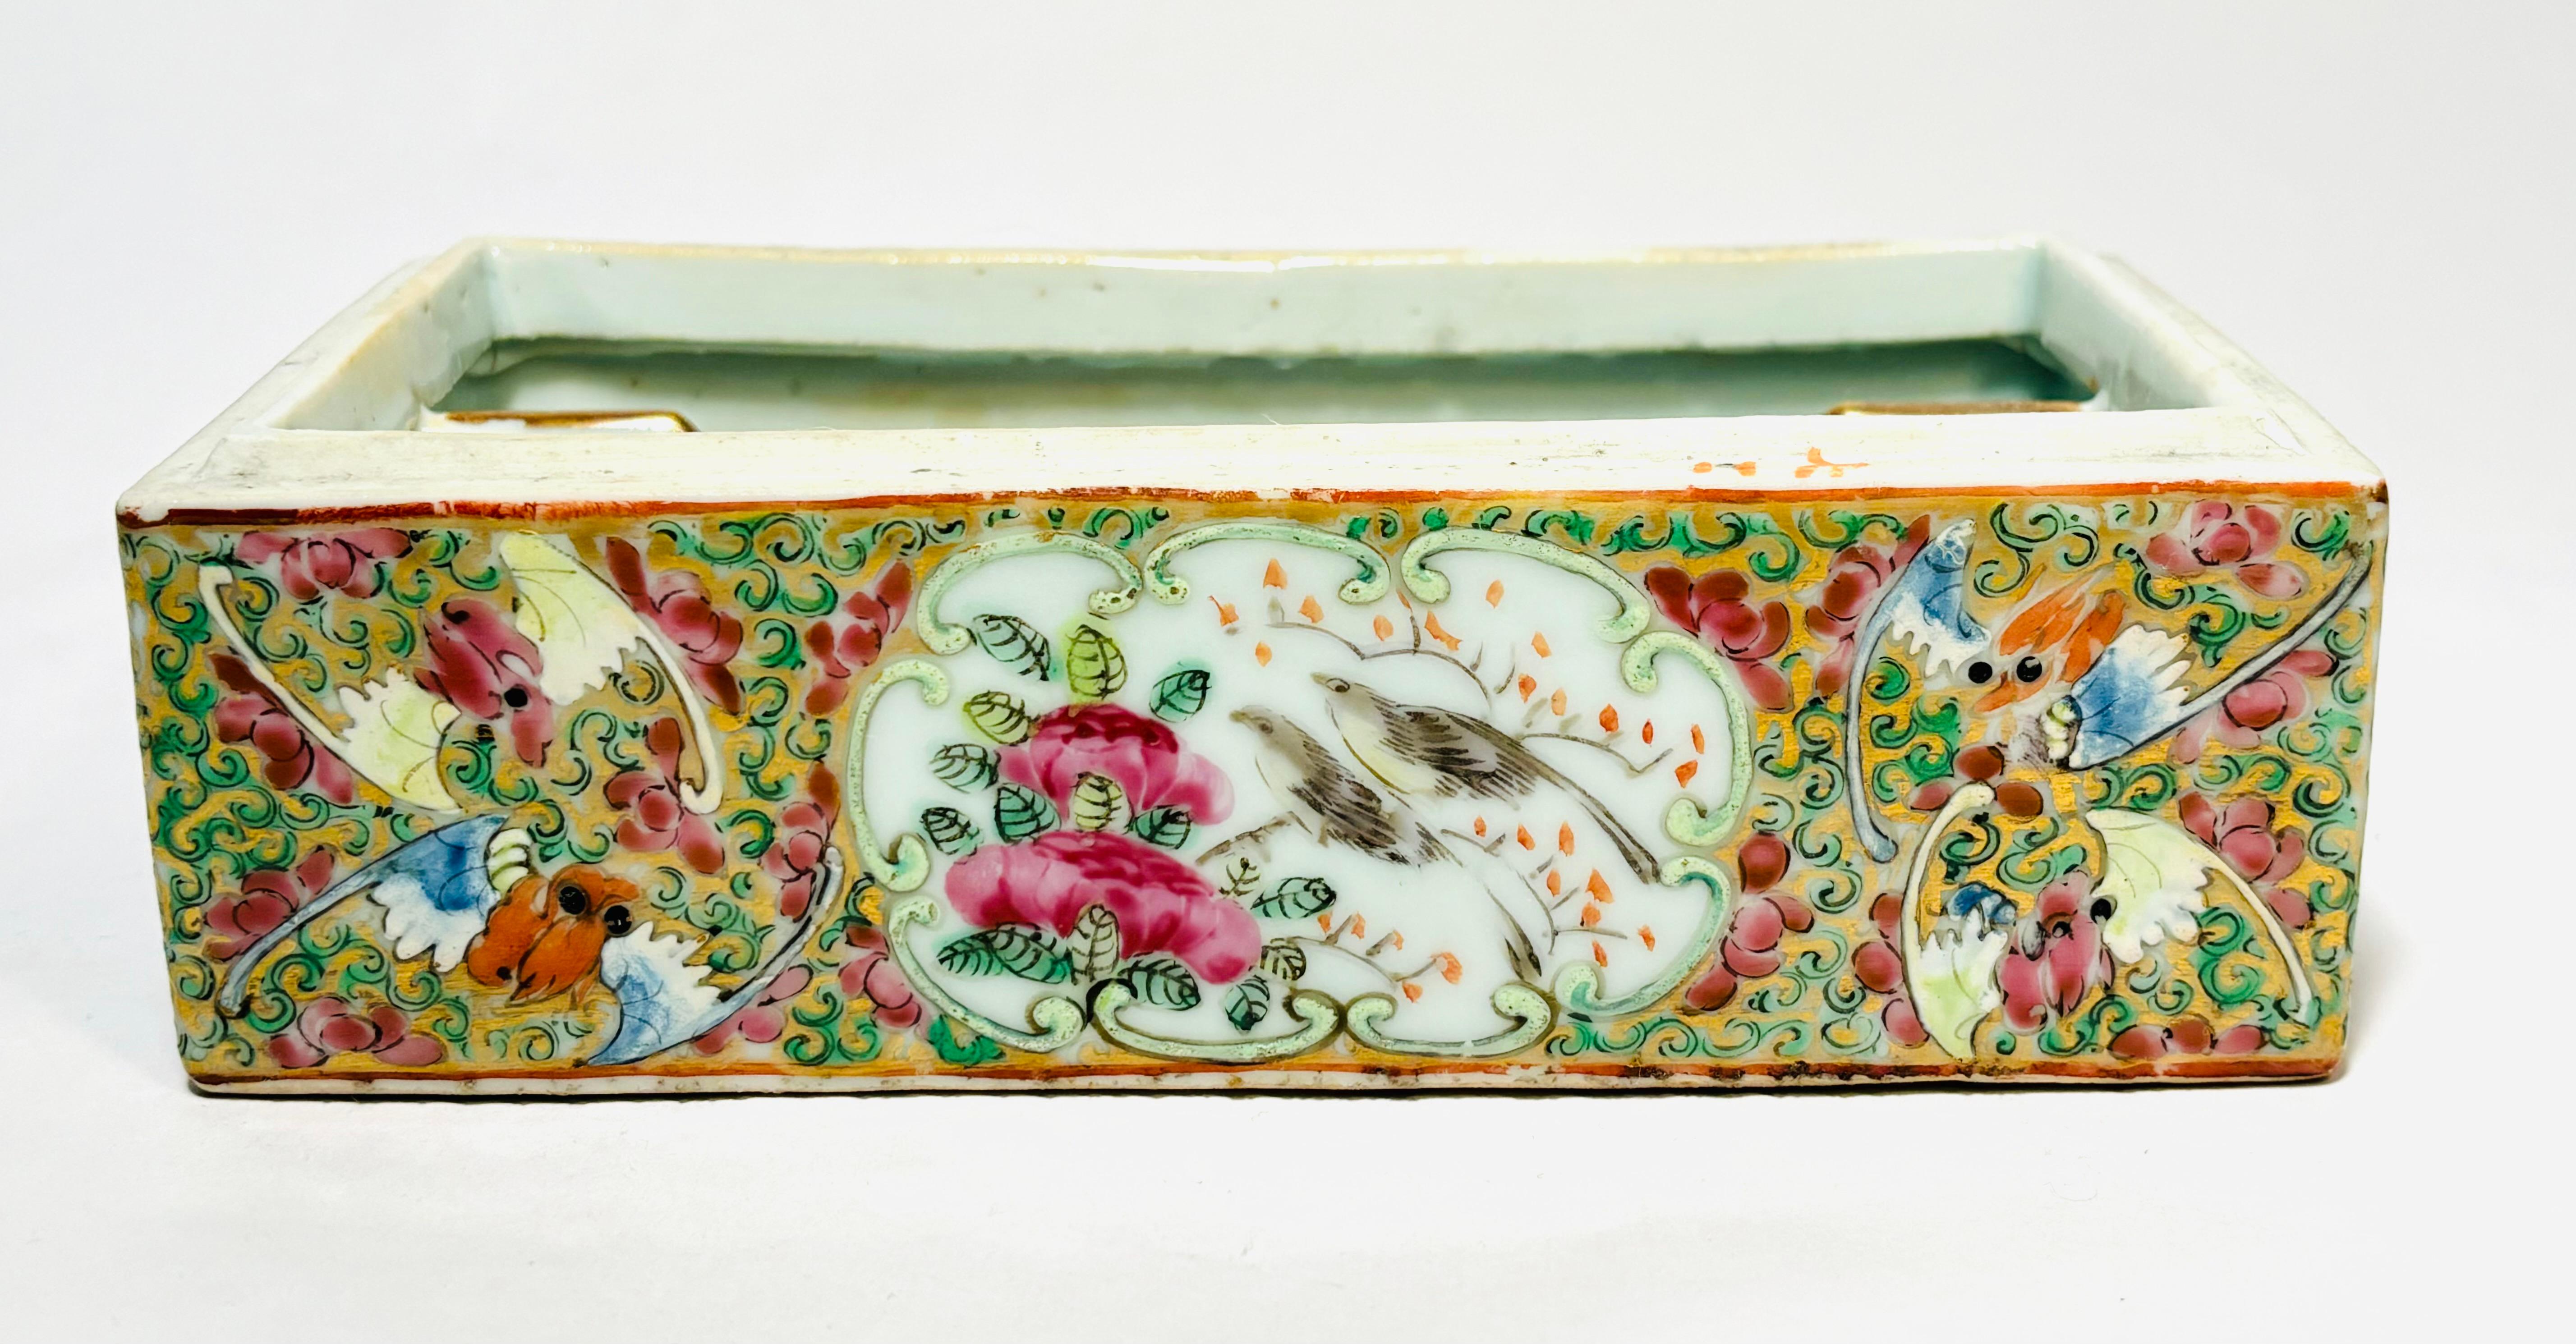 19th Century Antique Chinese Famille Rose Porcelain Box or Desk Accessory For Sale